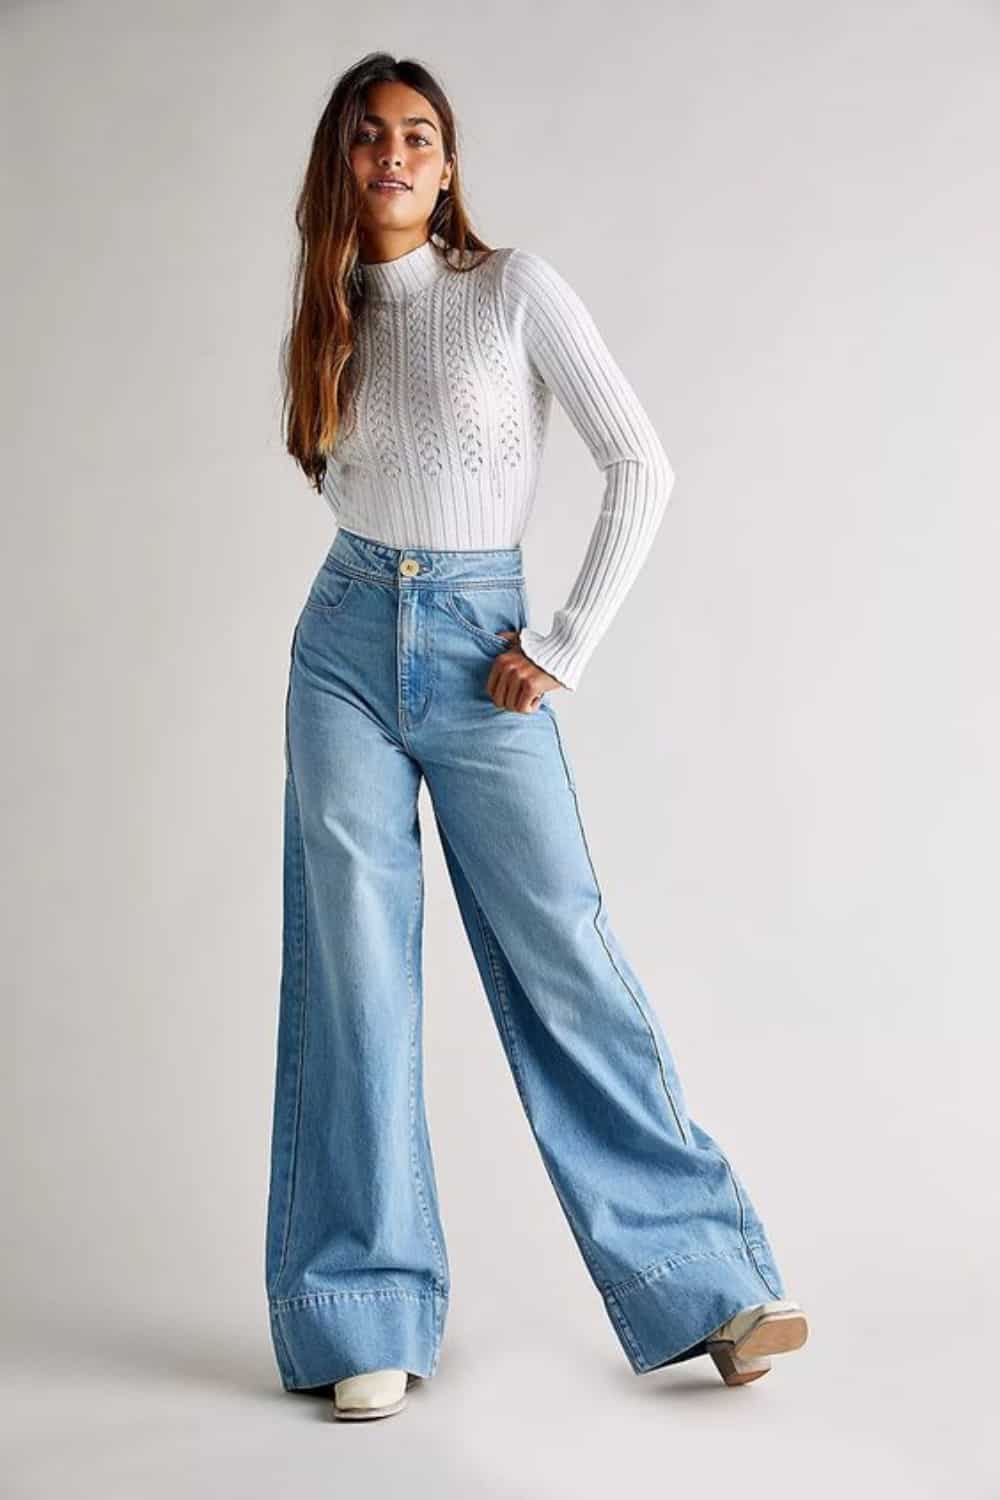 White Ankle Boots with Light Wash Wide Leg Jeans